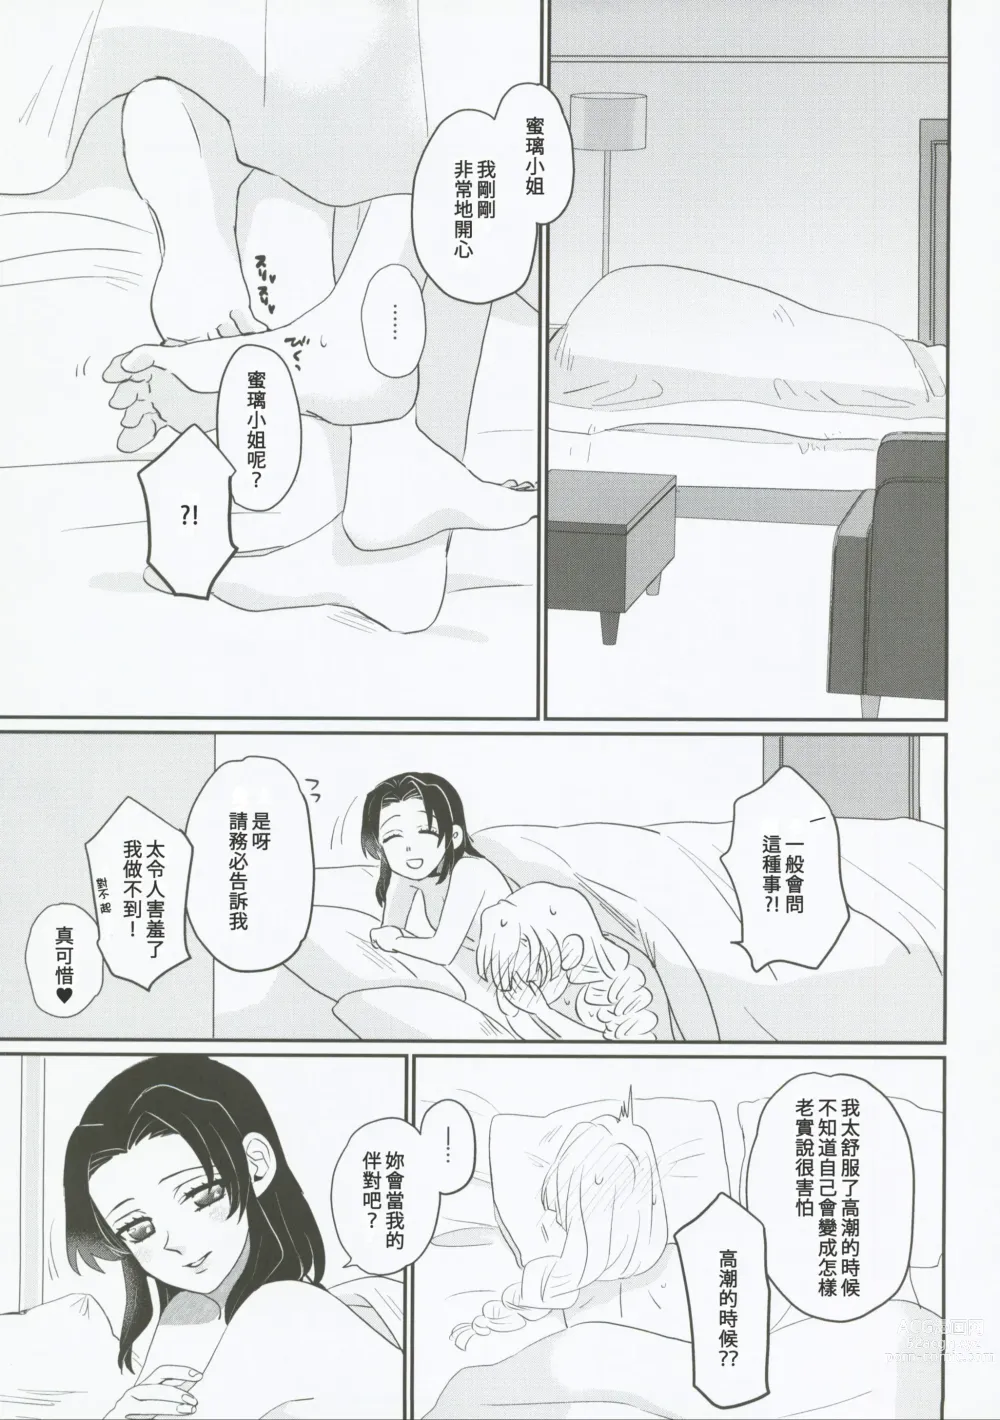 Page 42 of doujinshi 屬於妳的Omega